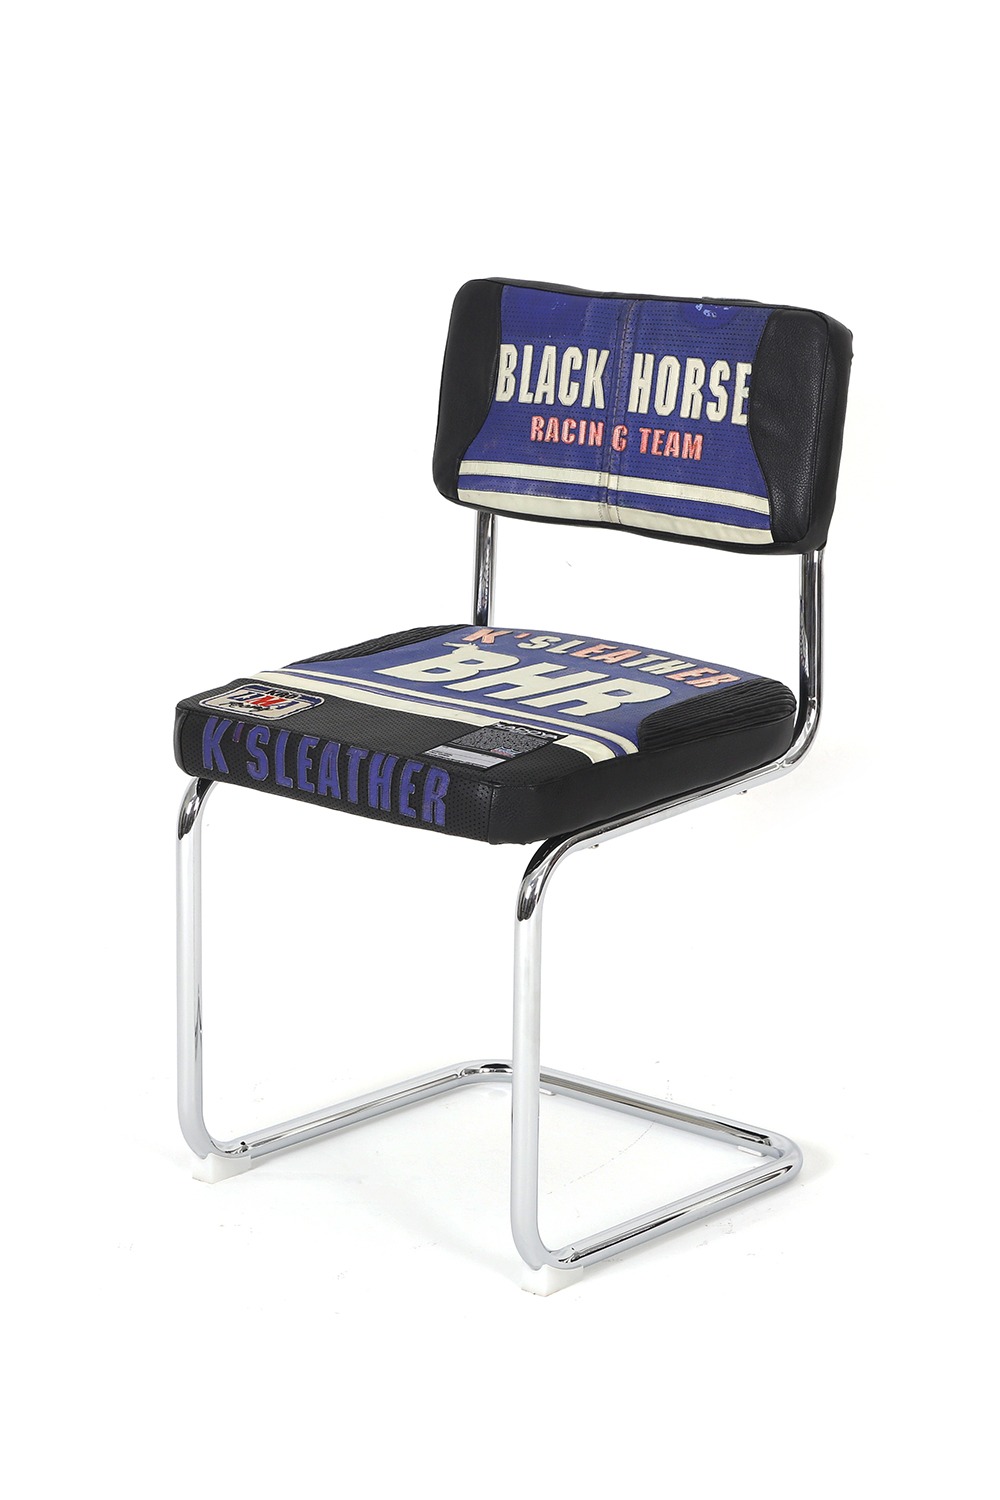 Chair C2 type 002 - Deconstructed Black Horse Racing Jacket Single Chair